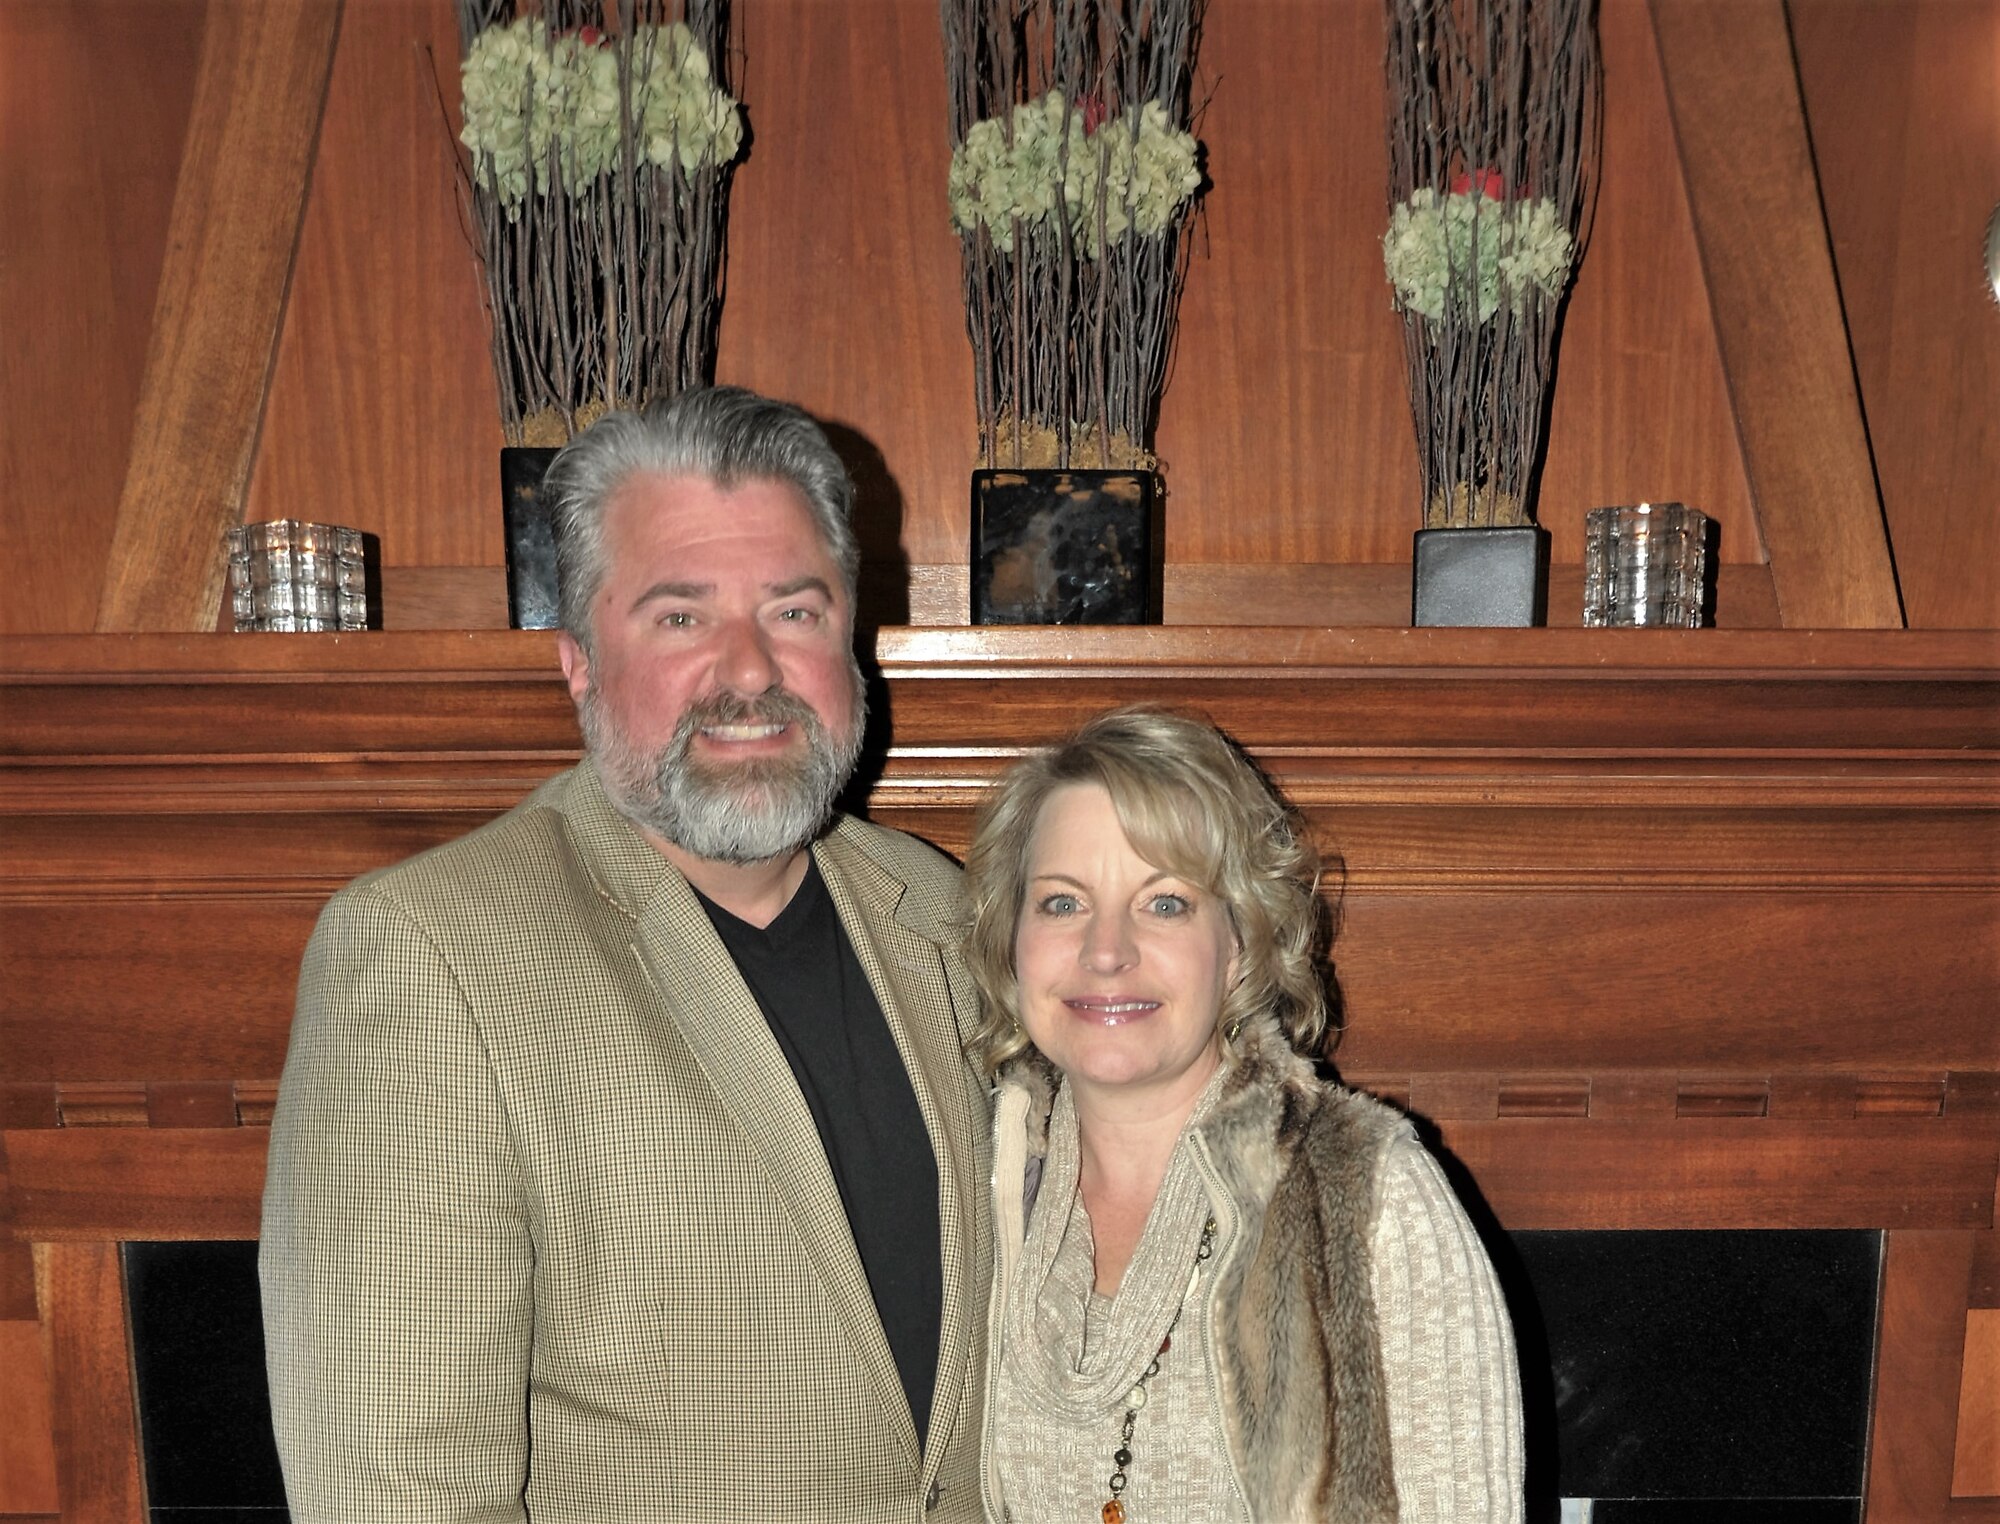 Schertz Mayor Michael Carpenter, who is the 340th Flying Training Group honorary commander, and his wife Missy post for a photo during the 340th FTG semi-annual commanders’ summit held March 4-7 in Fredericksburg, Texas. Group Commander Col. Allen Duckworth invited the Carpenters to attend the summit opening night ice-breaker dinner to enable them to continue to get to know each other. (U.S. Air Force photo)